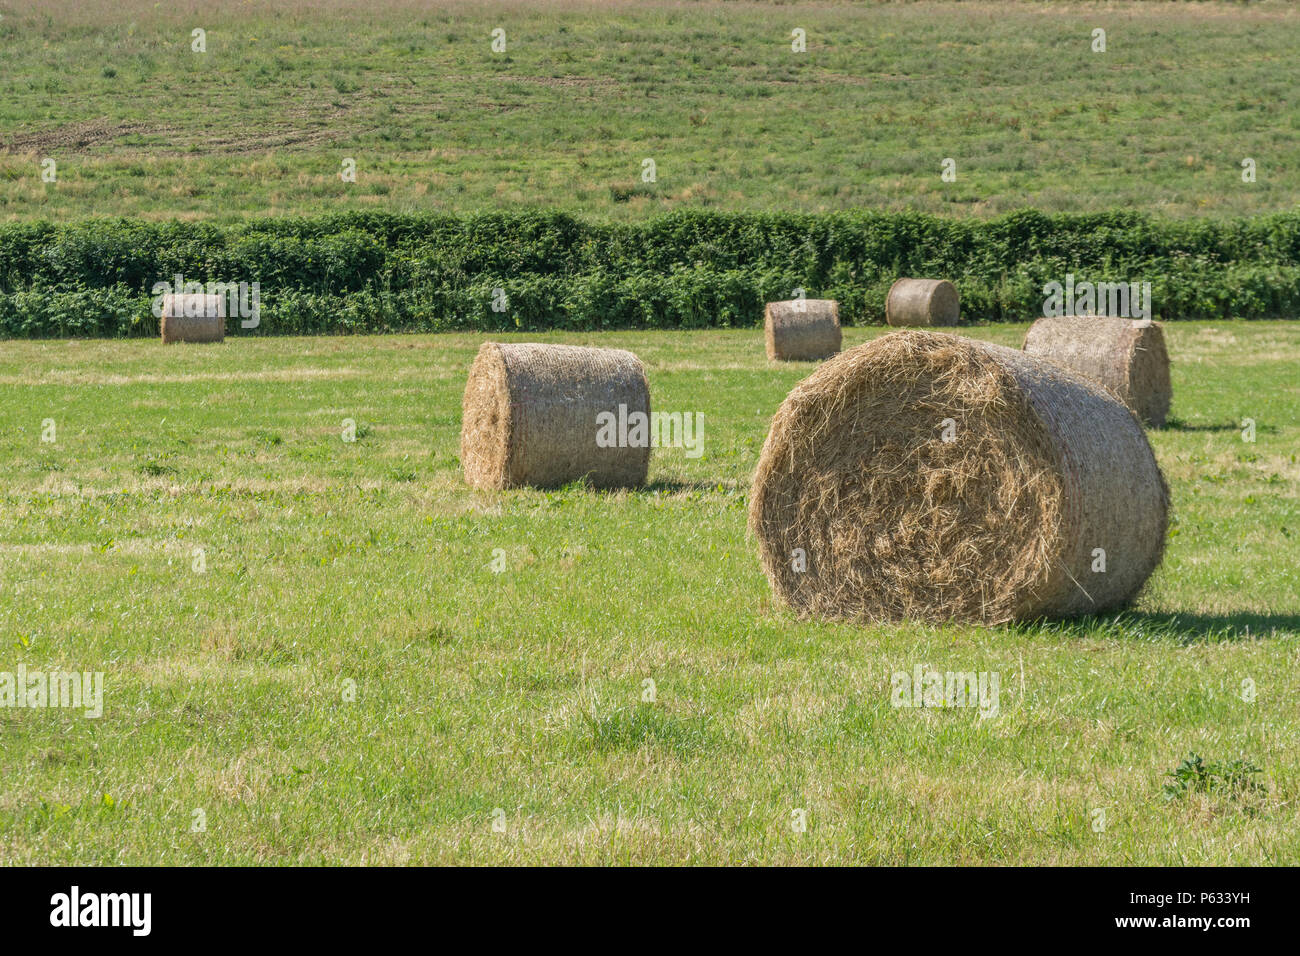 Bales of freshly baled hay in a sunlit field. Farm to fork and field to plate metaphors. Stock Photo